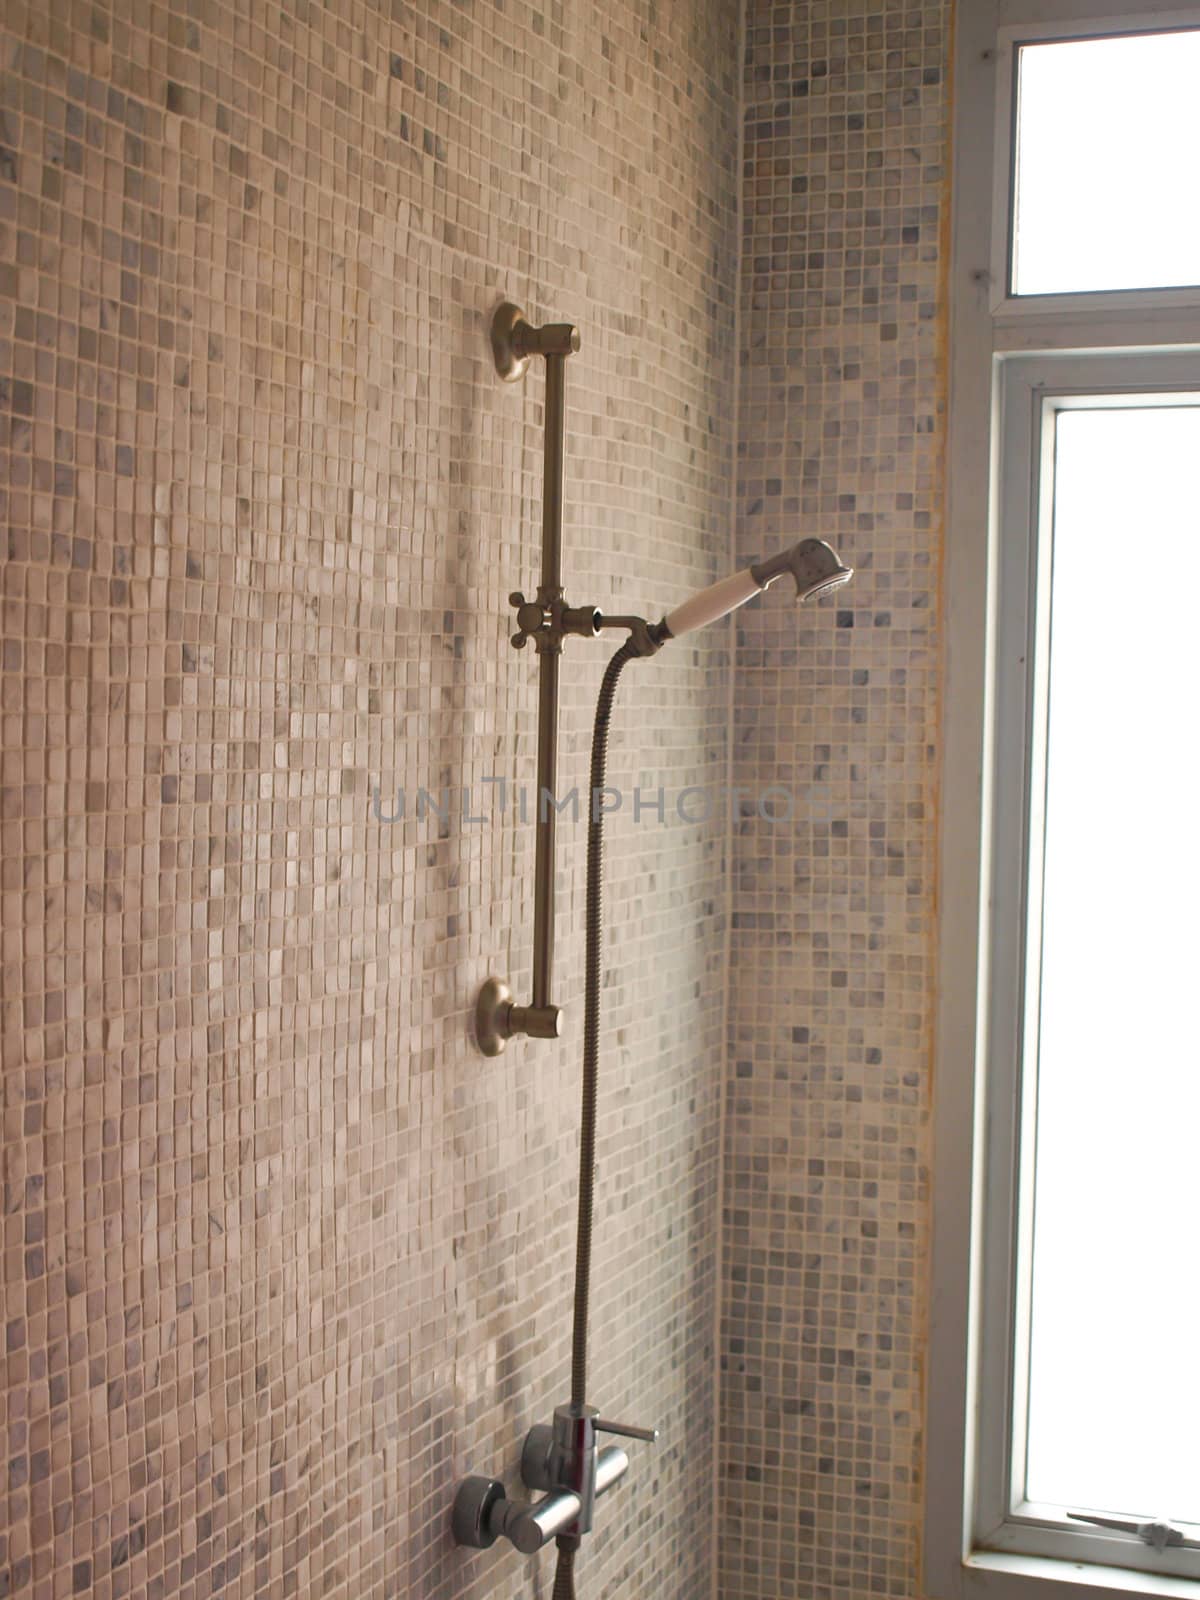 Modern shower faucet with light tiled wall and natural light